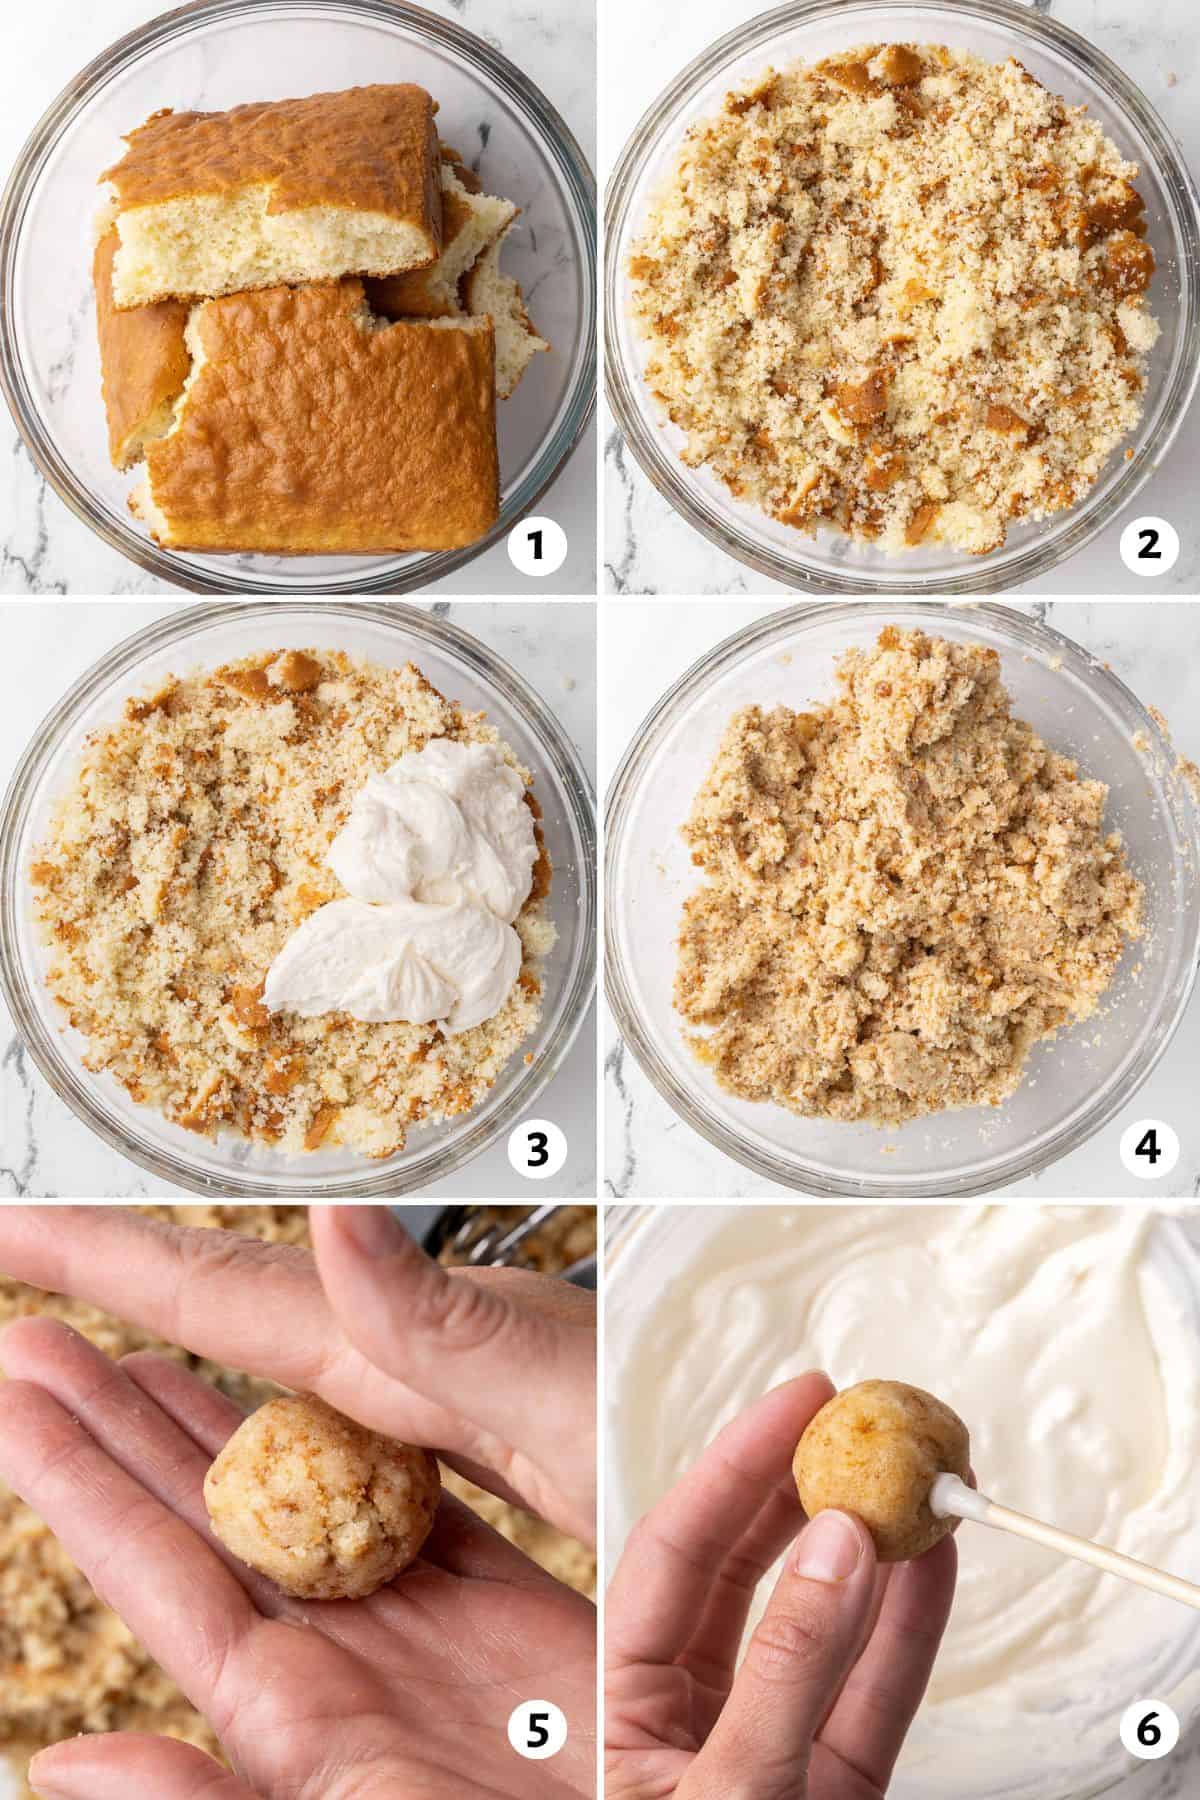 6 image collage making recipe: 1- cake in a bowl, 2- after crumbling, 3- buttercream added, 4- after mixed together, 5- hand rolling cake ball between palms, 6- adding a stick into cake pop with a little buttercream on the end.